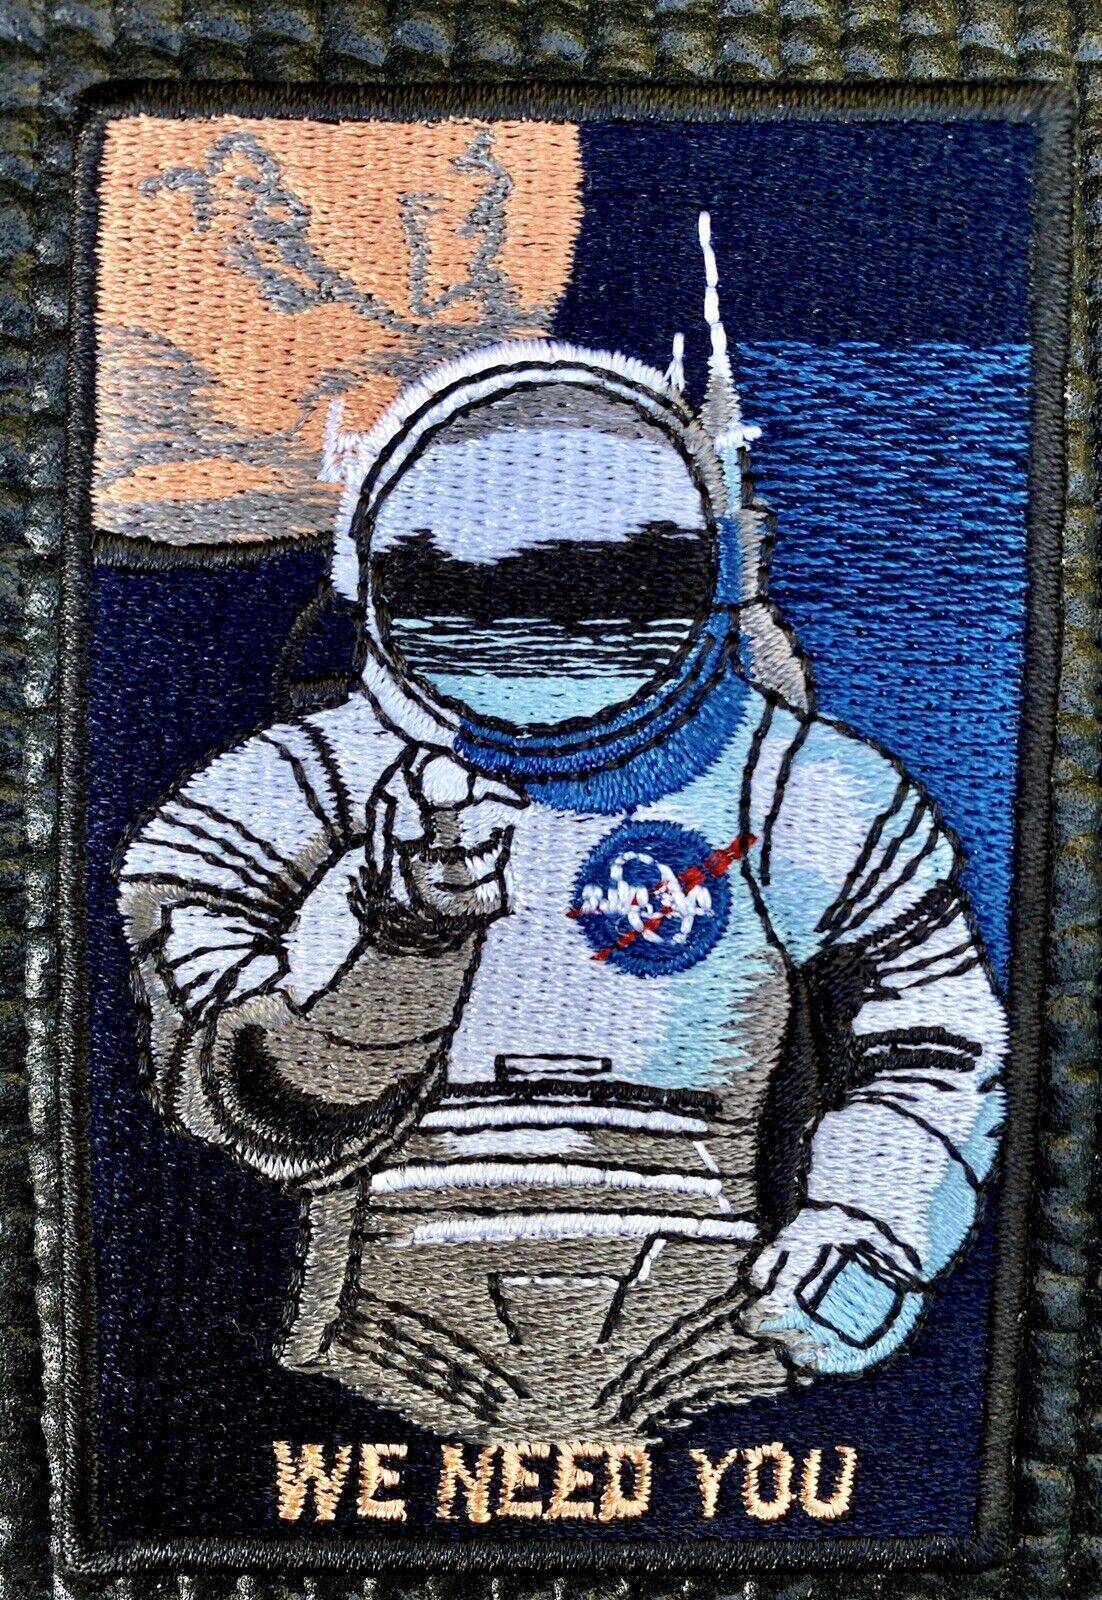 NASA MARS ASTRONAUT RECRUITMENT CAMPAIGN- “WE NEED YOU” PATCH - 3.5” X 2.5”